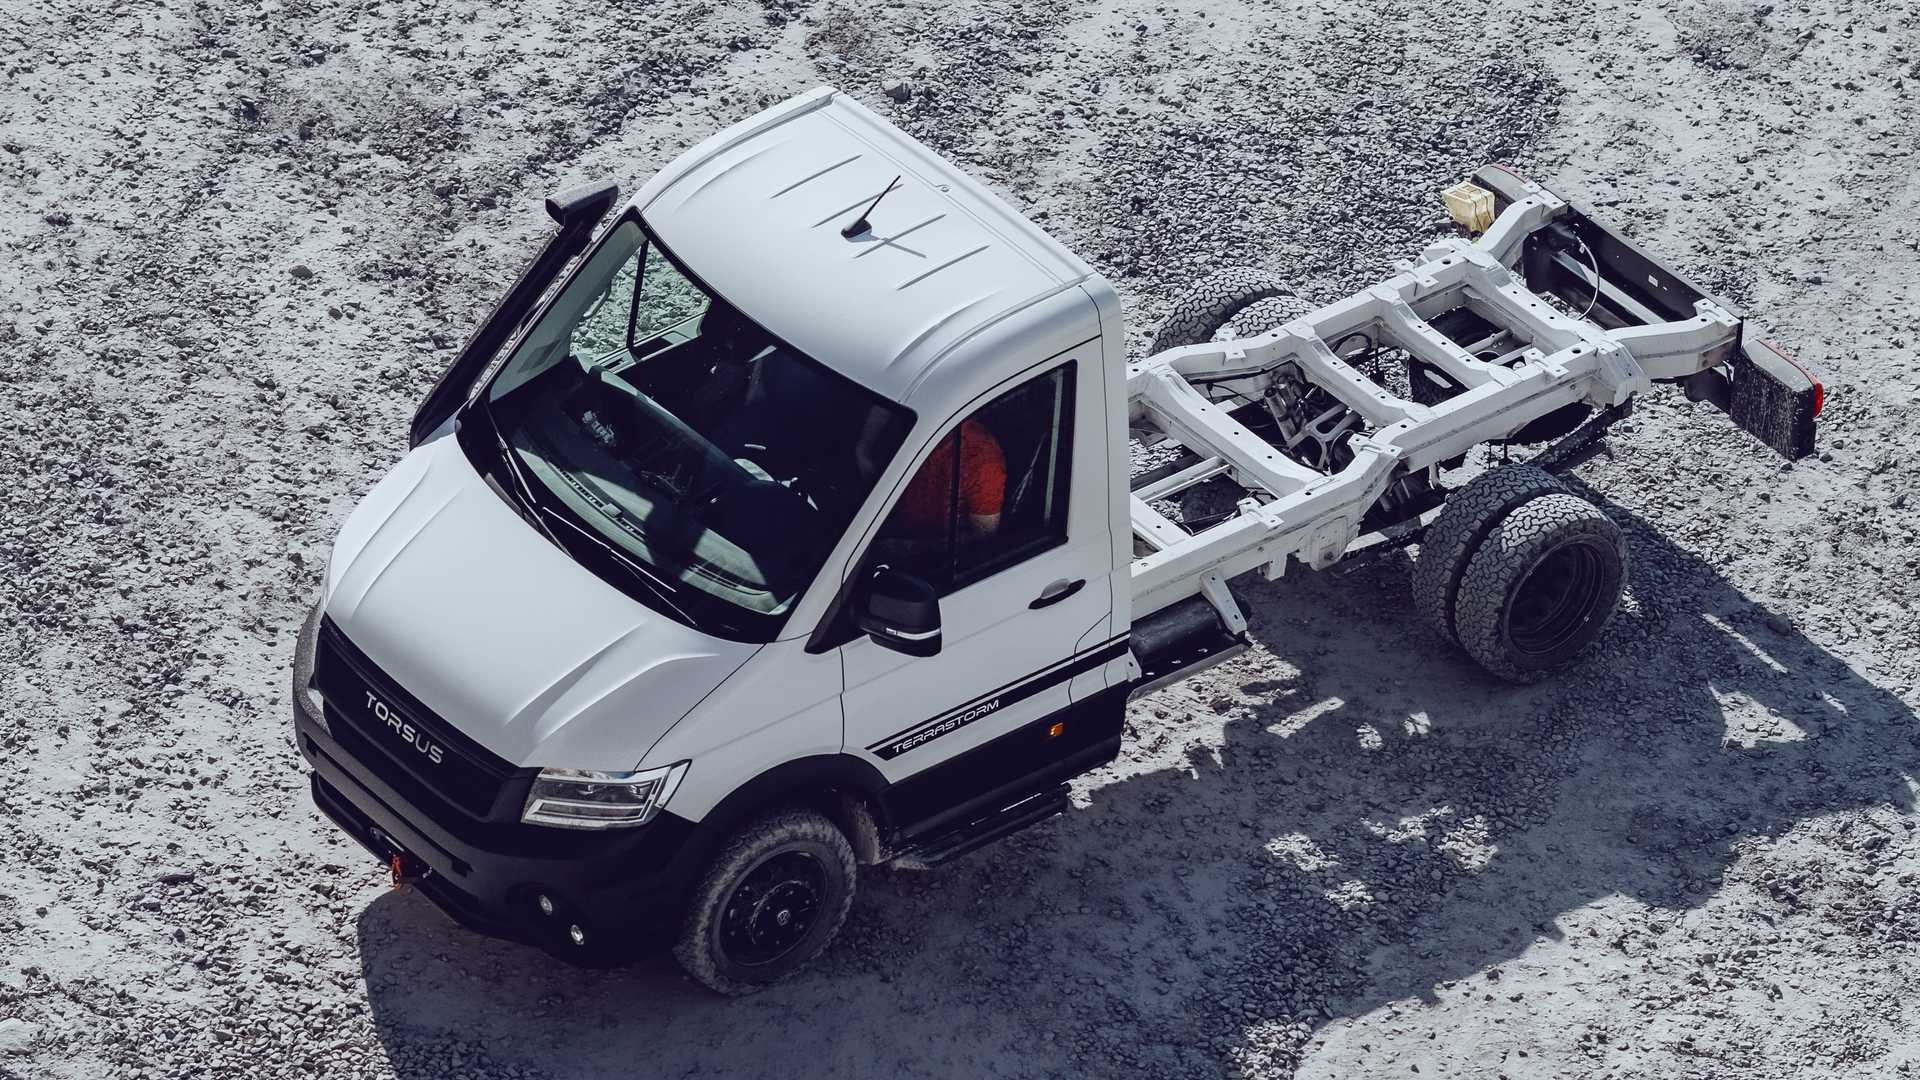 The Torsus Terrastorm Chassis Cab is based on the Volkswagen Crafter